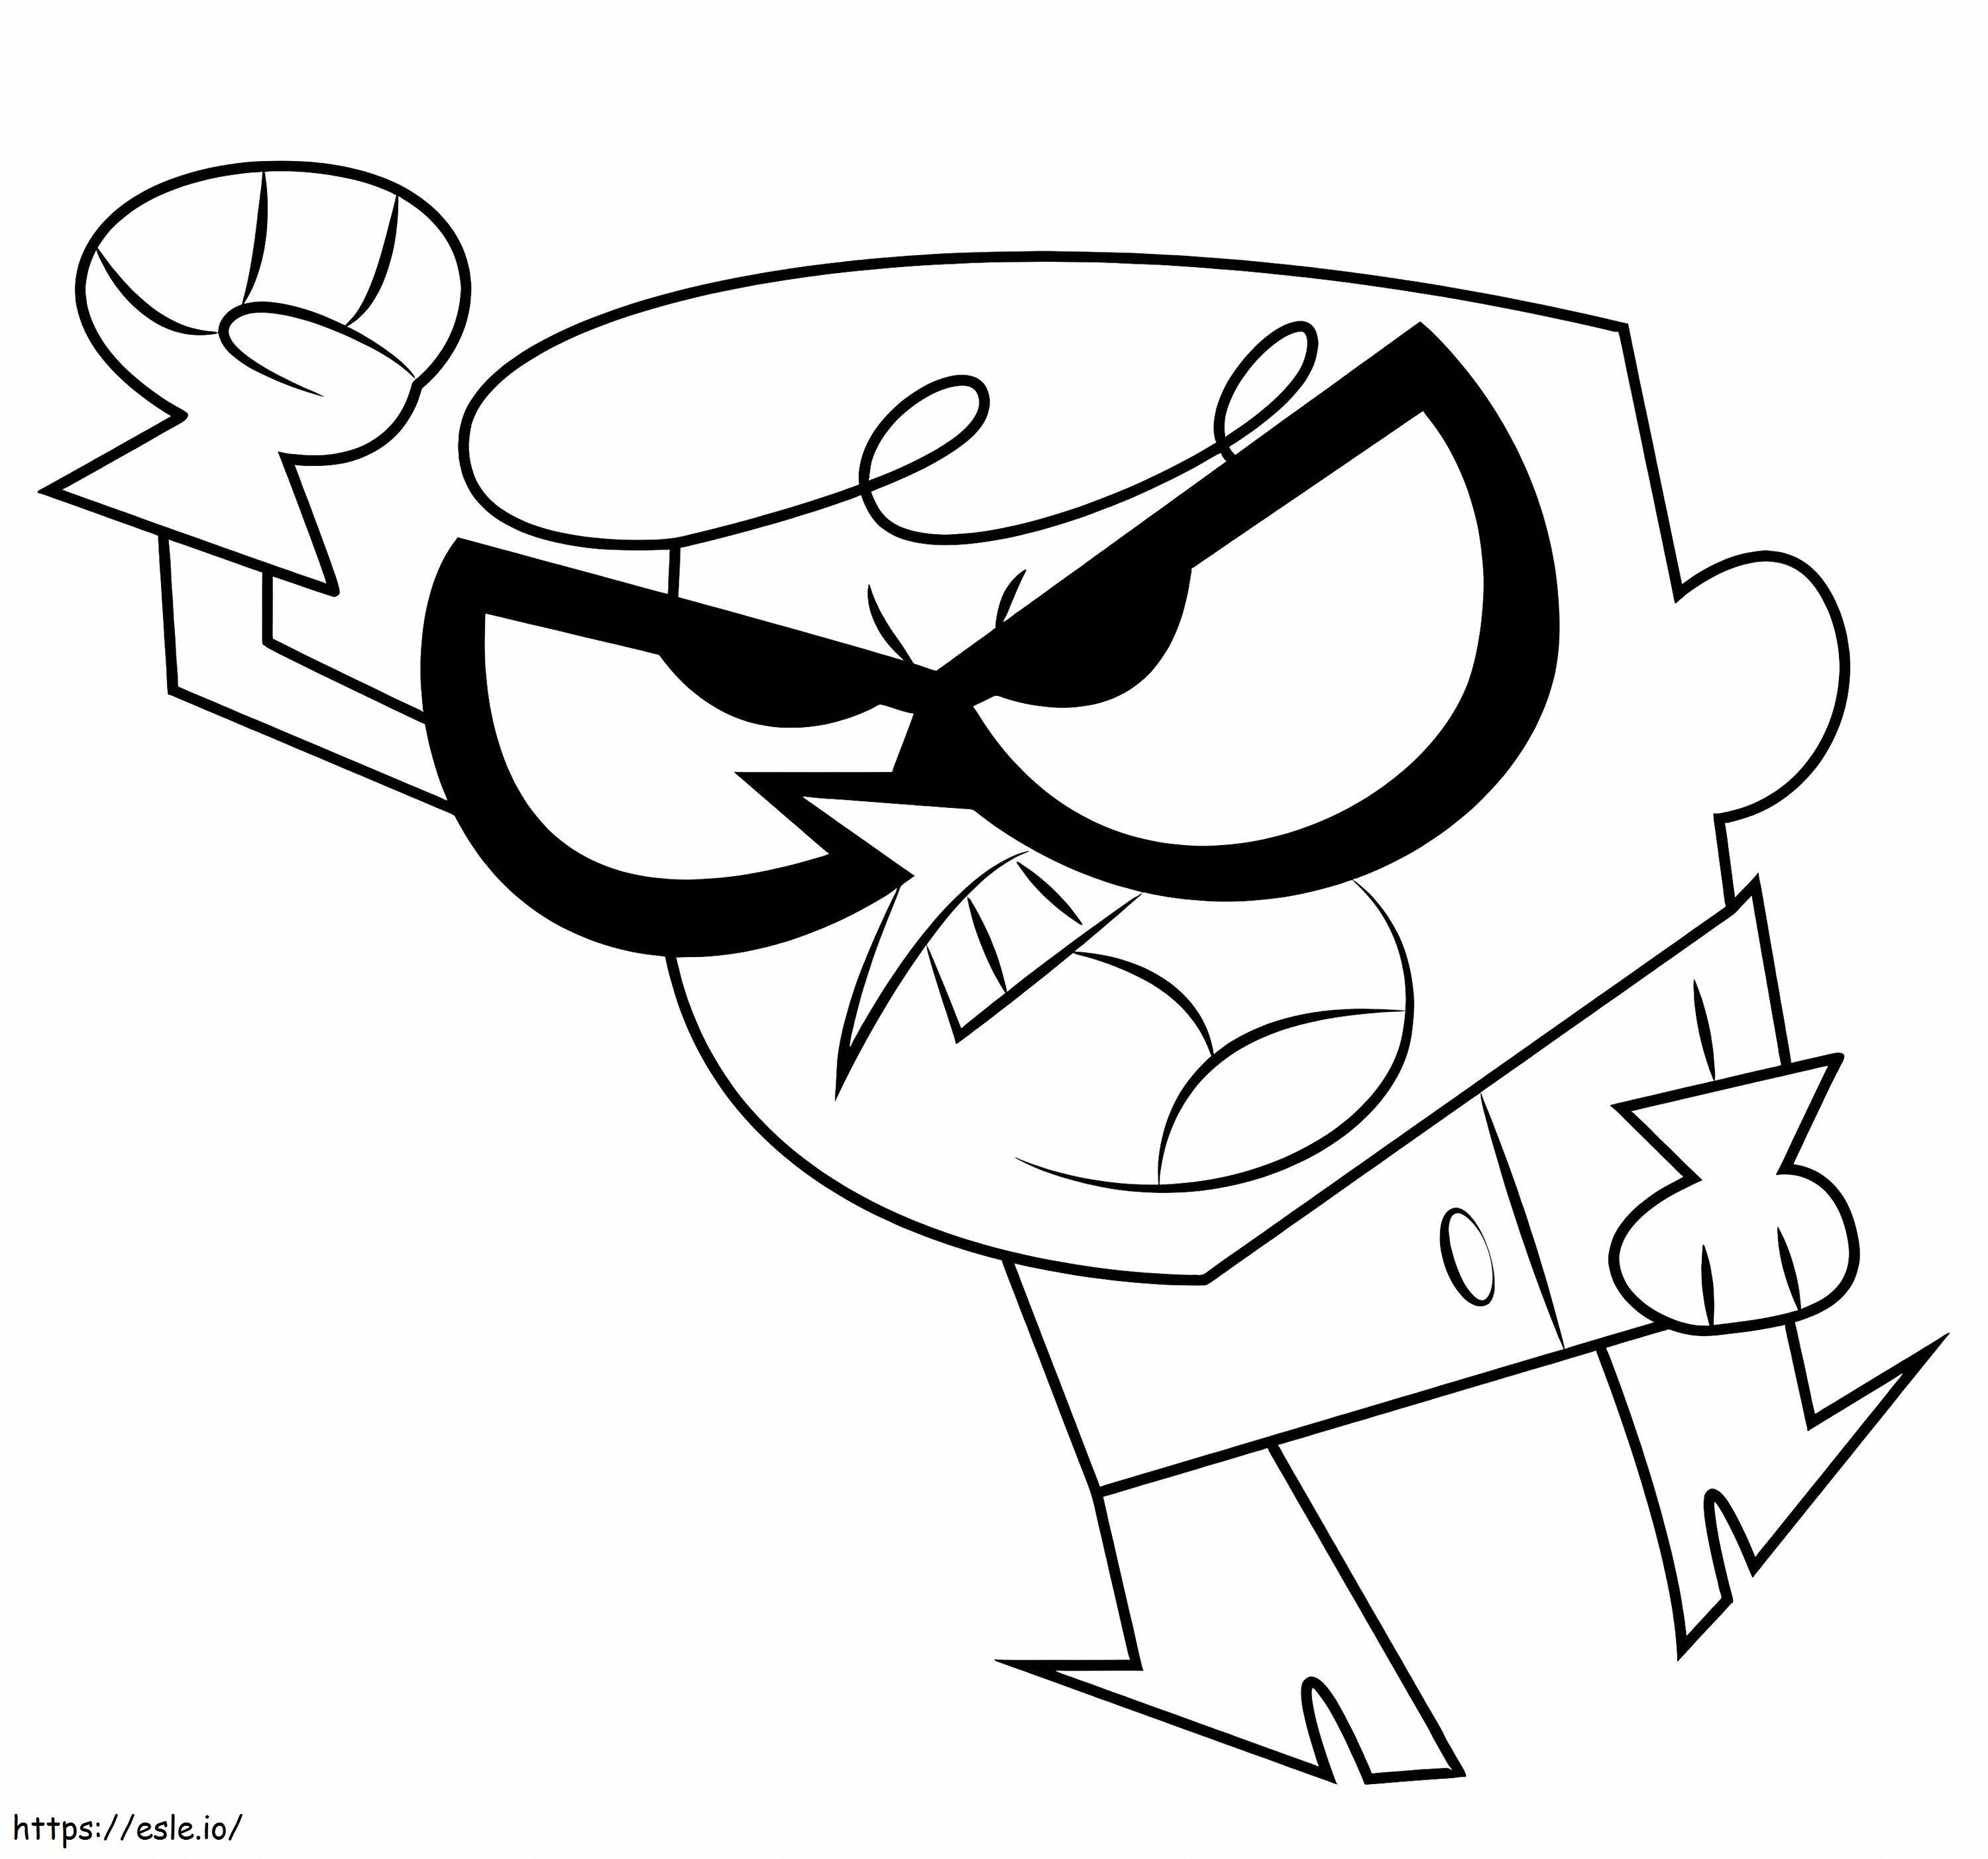 Dexter Is Angry coloring page